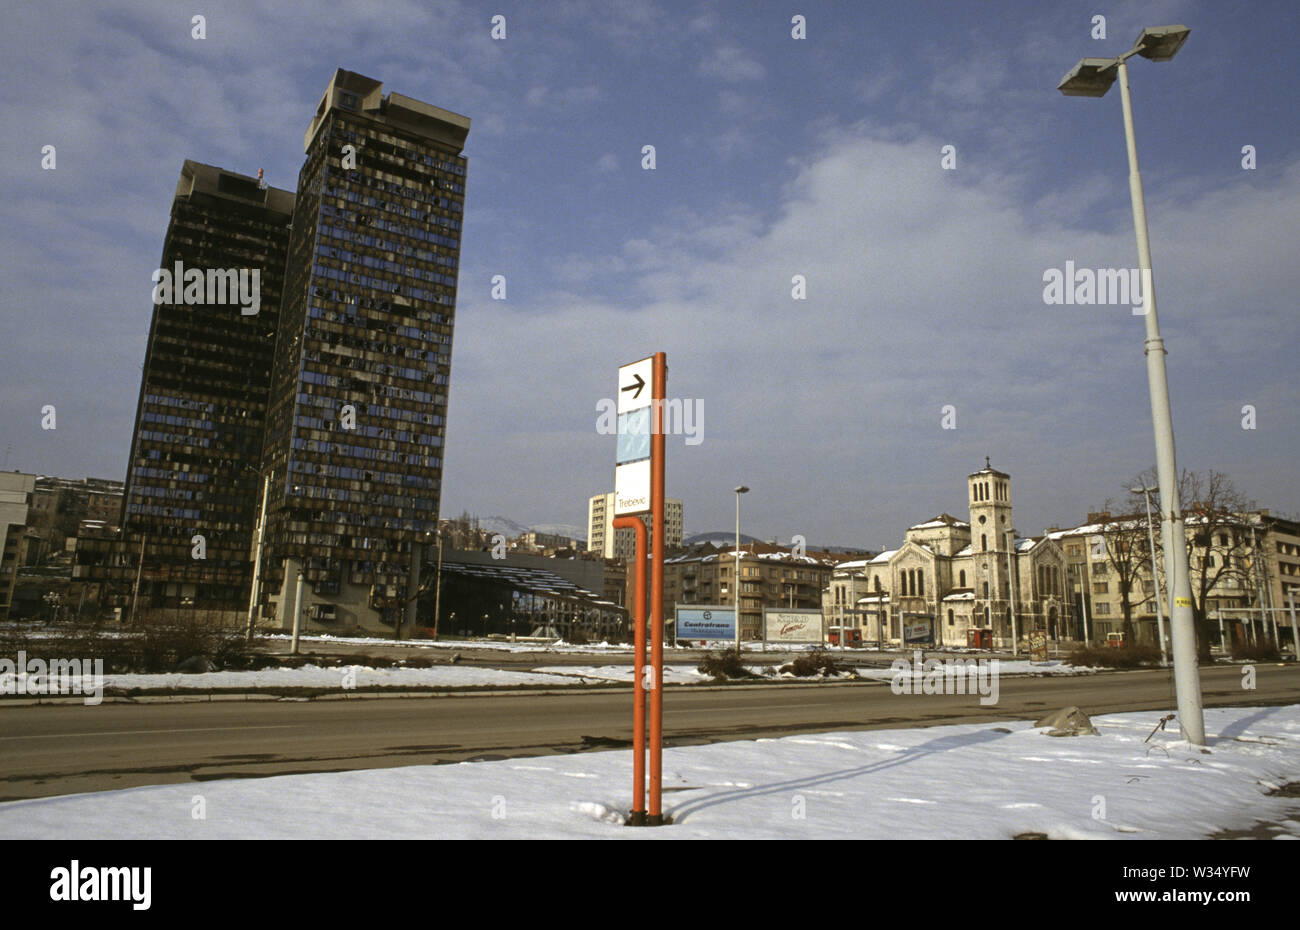 2nd April 1993 During the Siege of Sarajevo: the view across 'Sniper Alley' (Zmaja od Bosne) from the front of the Assembly Building. On the right is Saint Joseph’s Church (Roman Catholic); on the left, the twin Unis Towers. Behind the signpost in the centre is the Dr Abdulah Nakas General Hospital, known locally as the 'City' or 'French' Hospital during the war. Stock Photo